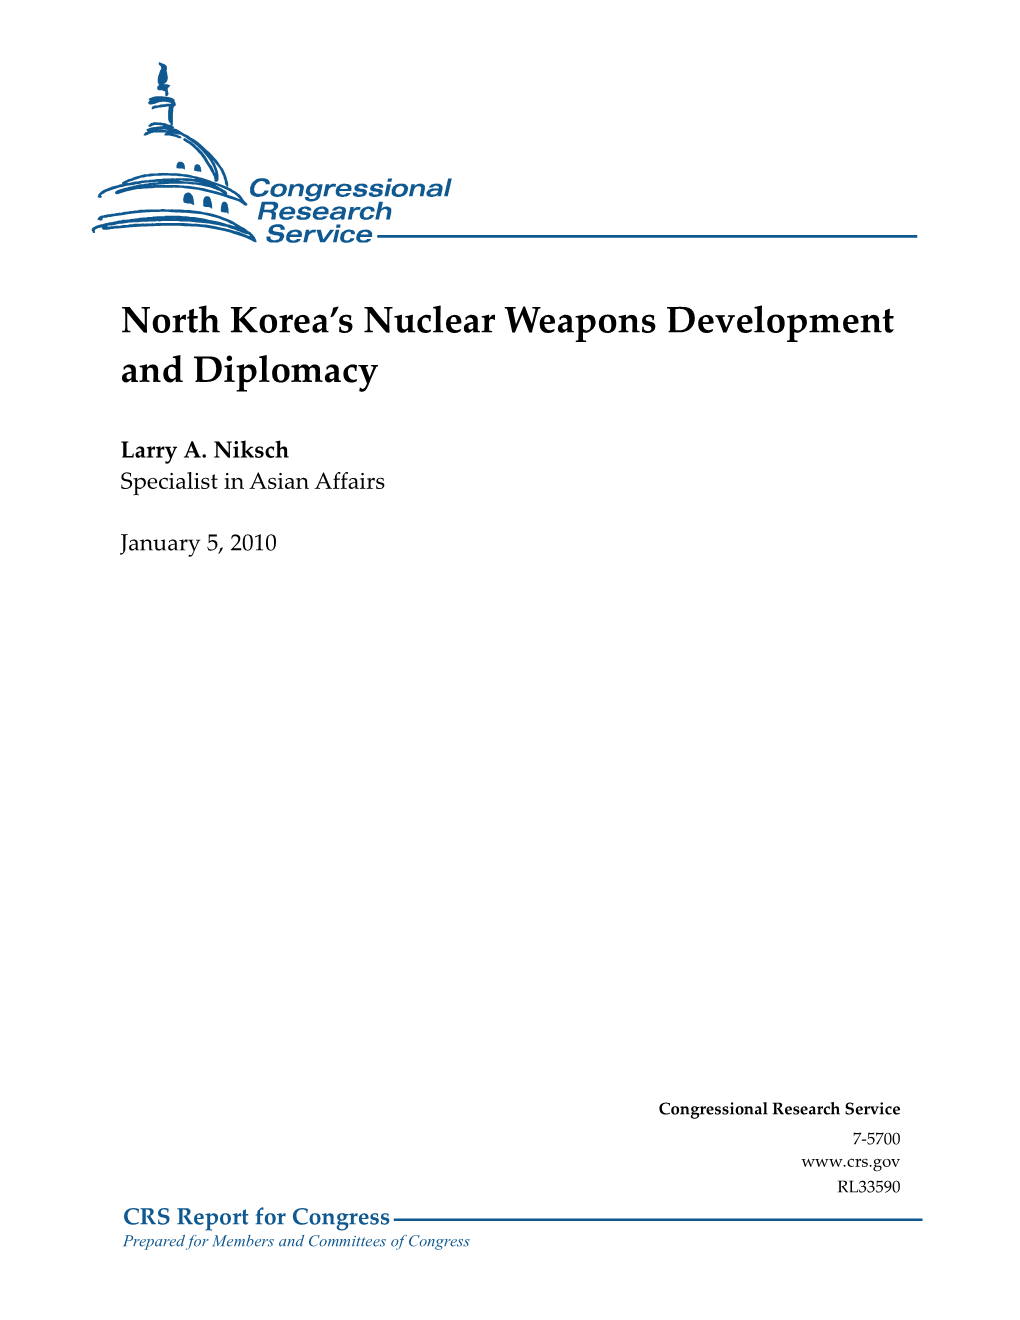 North Korea's Nuclear Weapons Development and Diplomacy